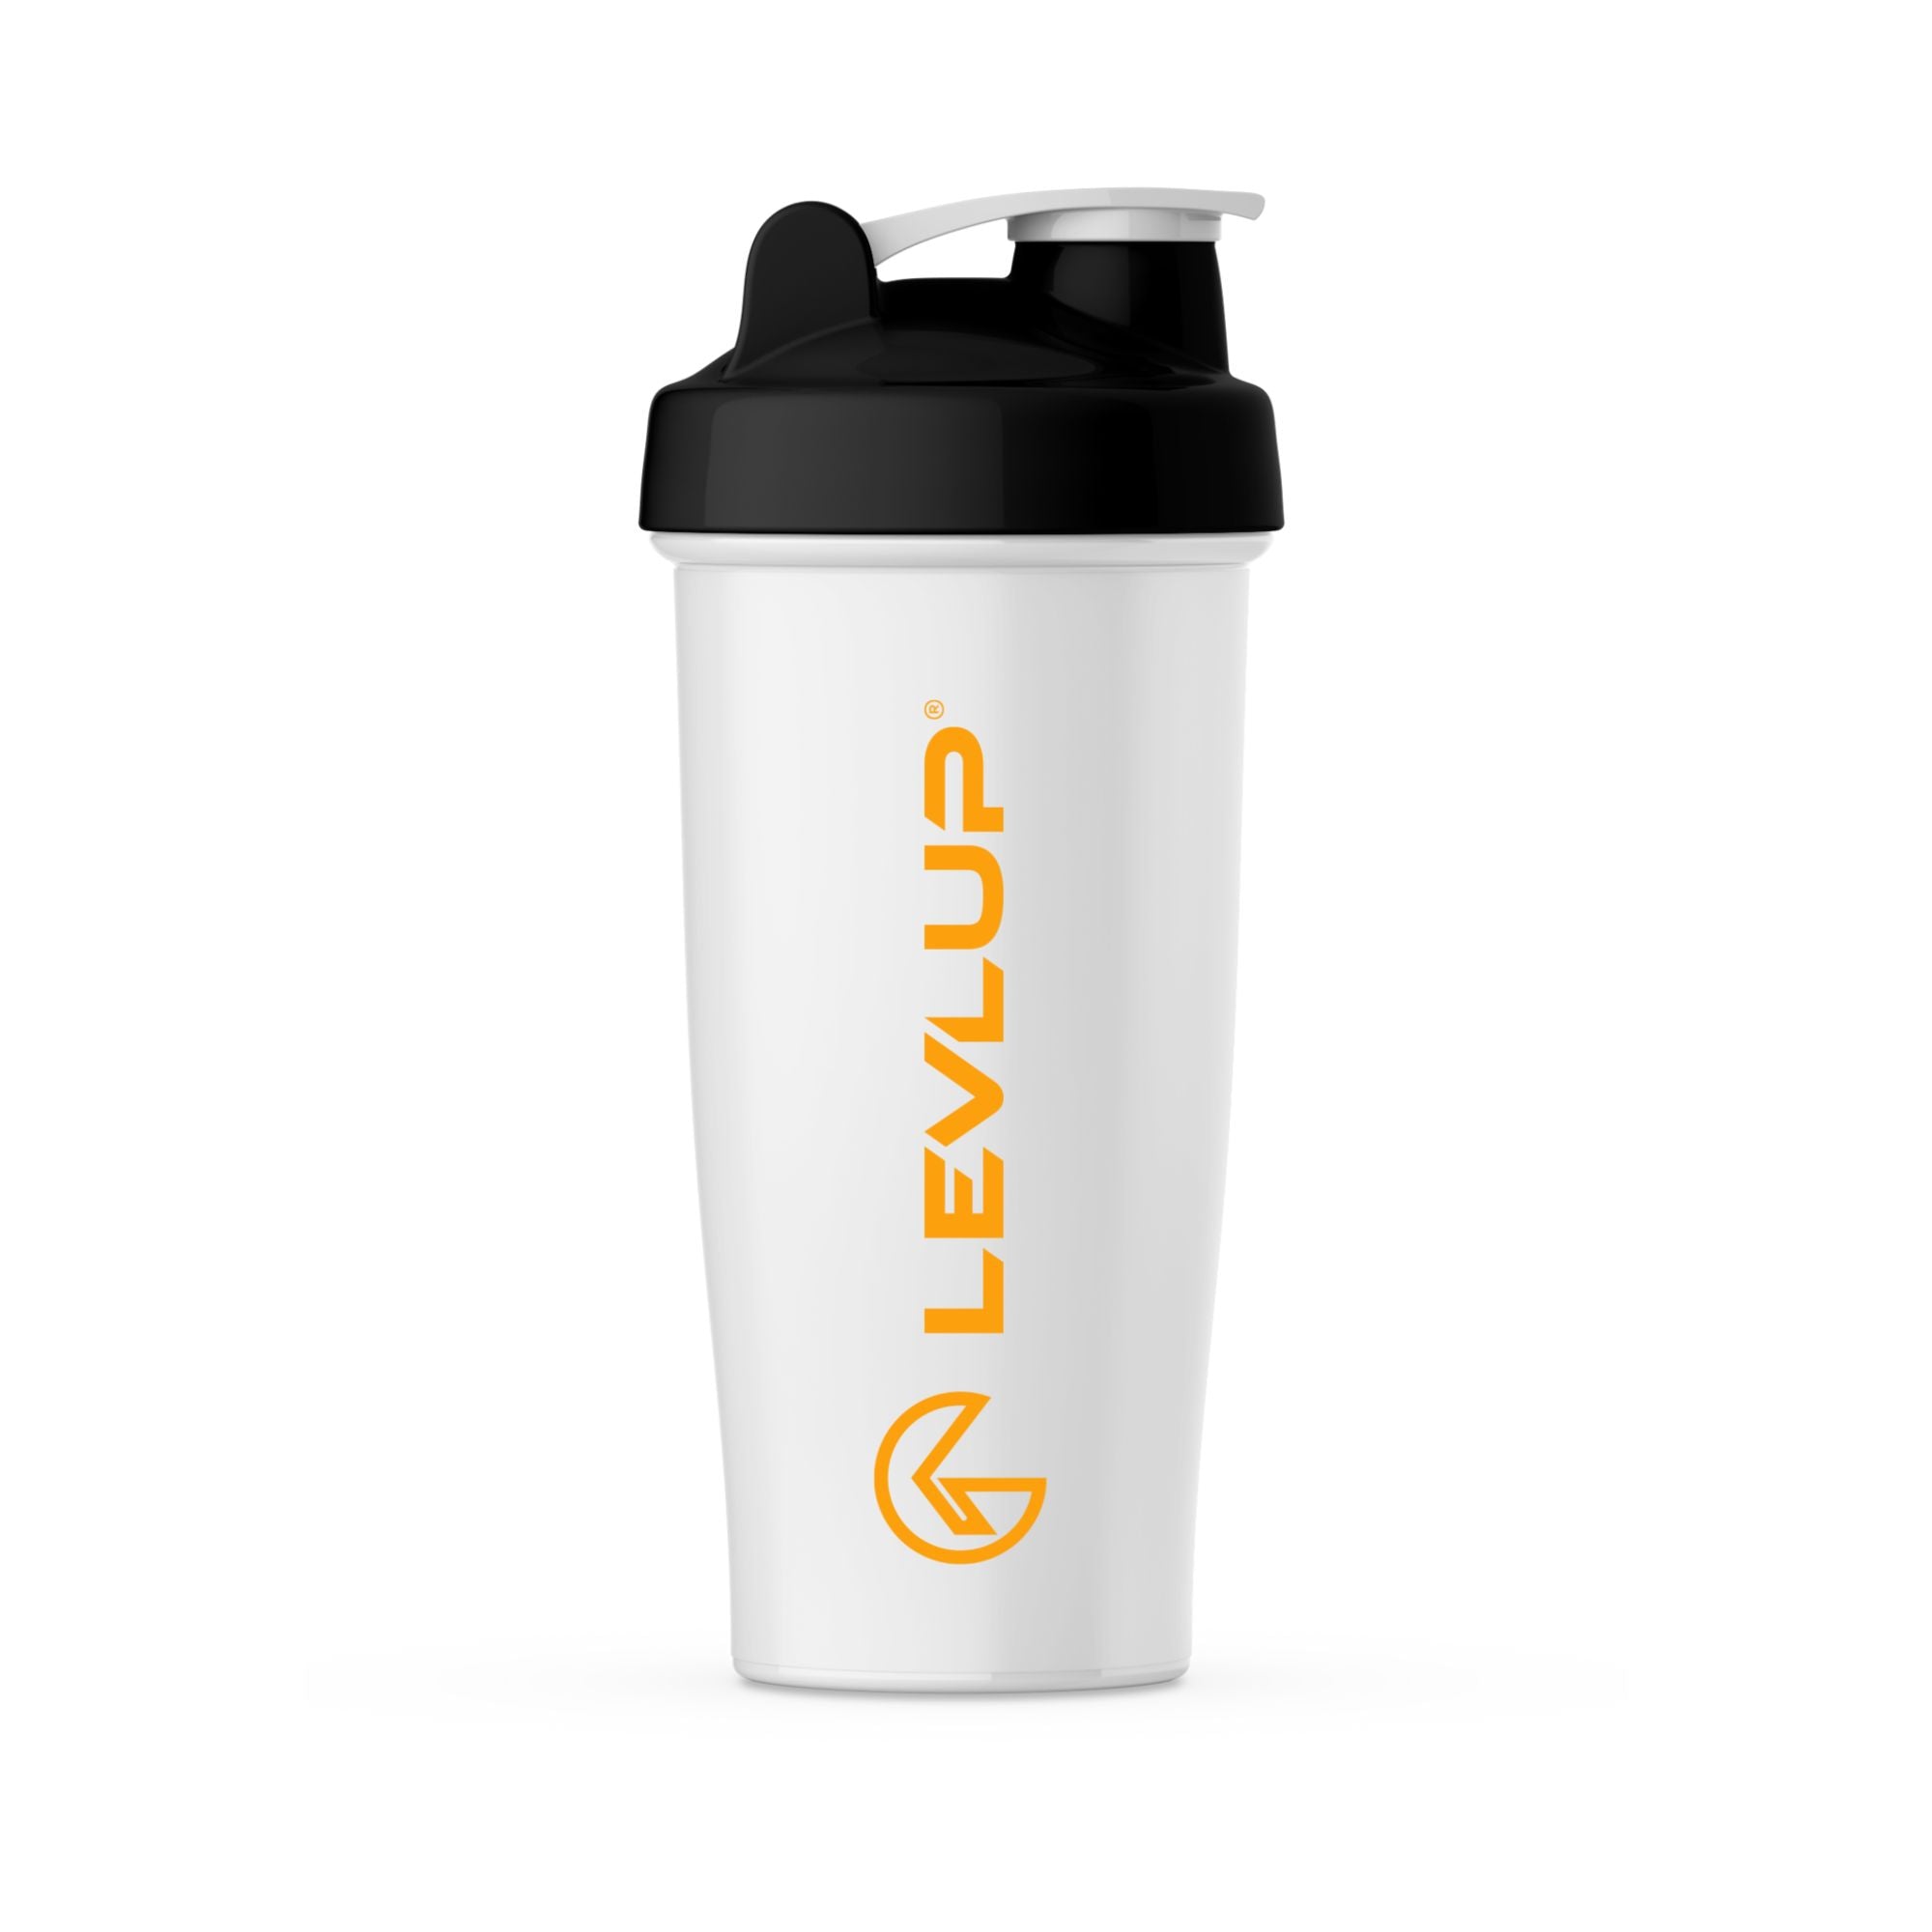 LevlUp Protein Shaker